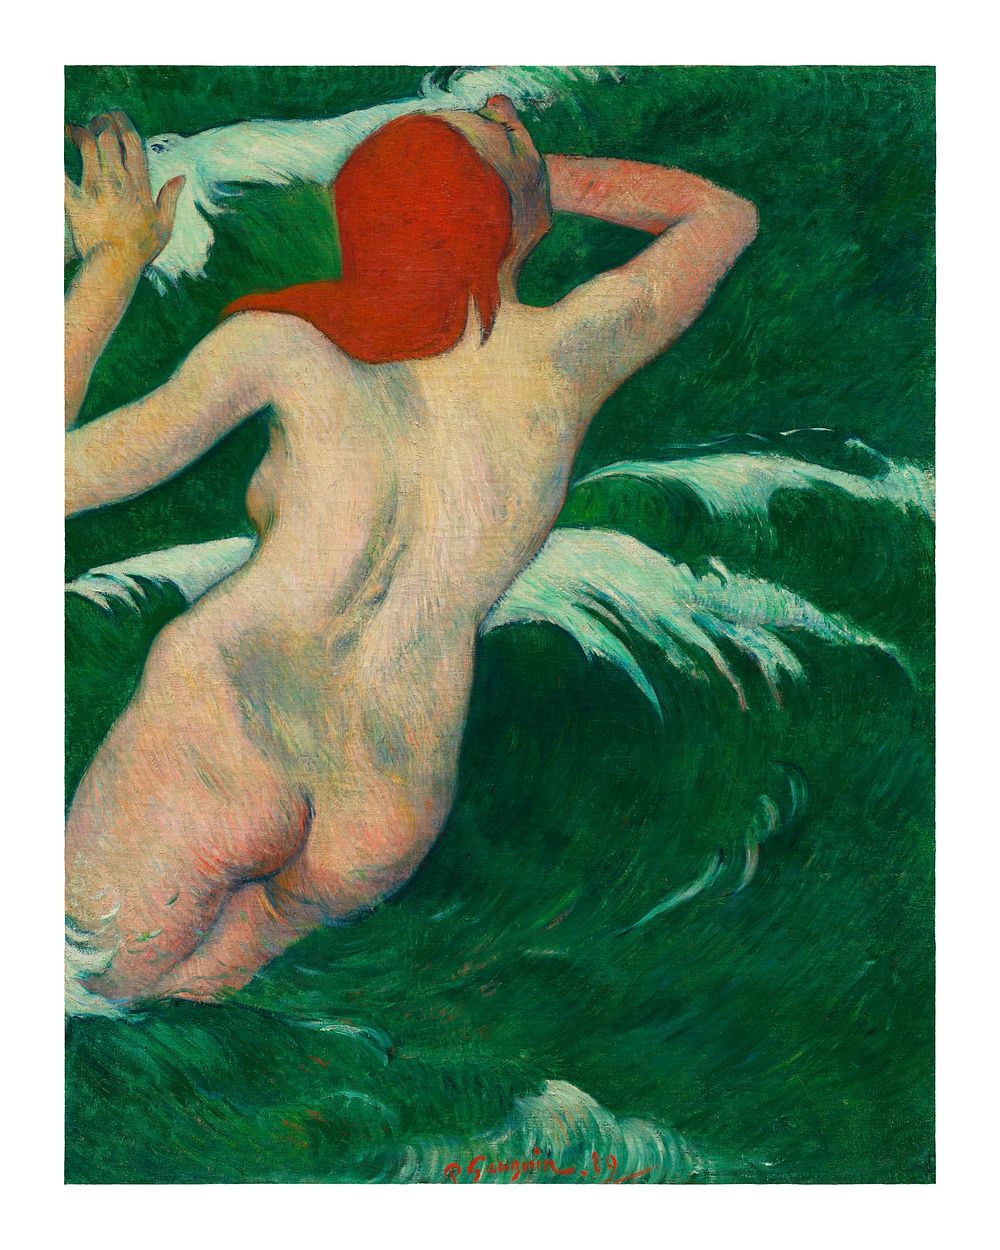 Paul Gauguin art print, In the Waves painting (1889).Original from The Cleveland Museum of Art. Digita lly enhanced by…